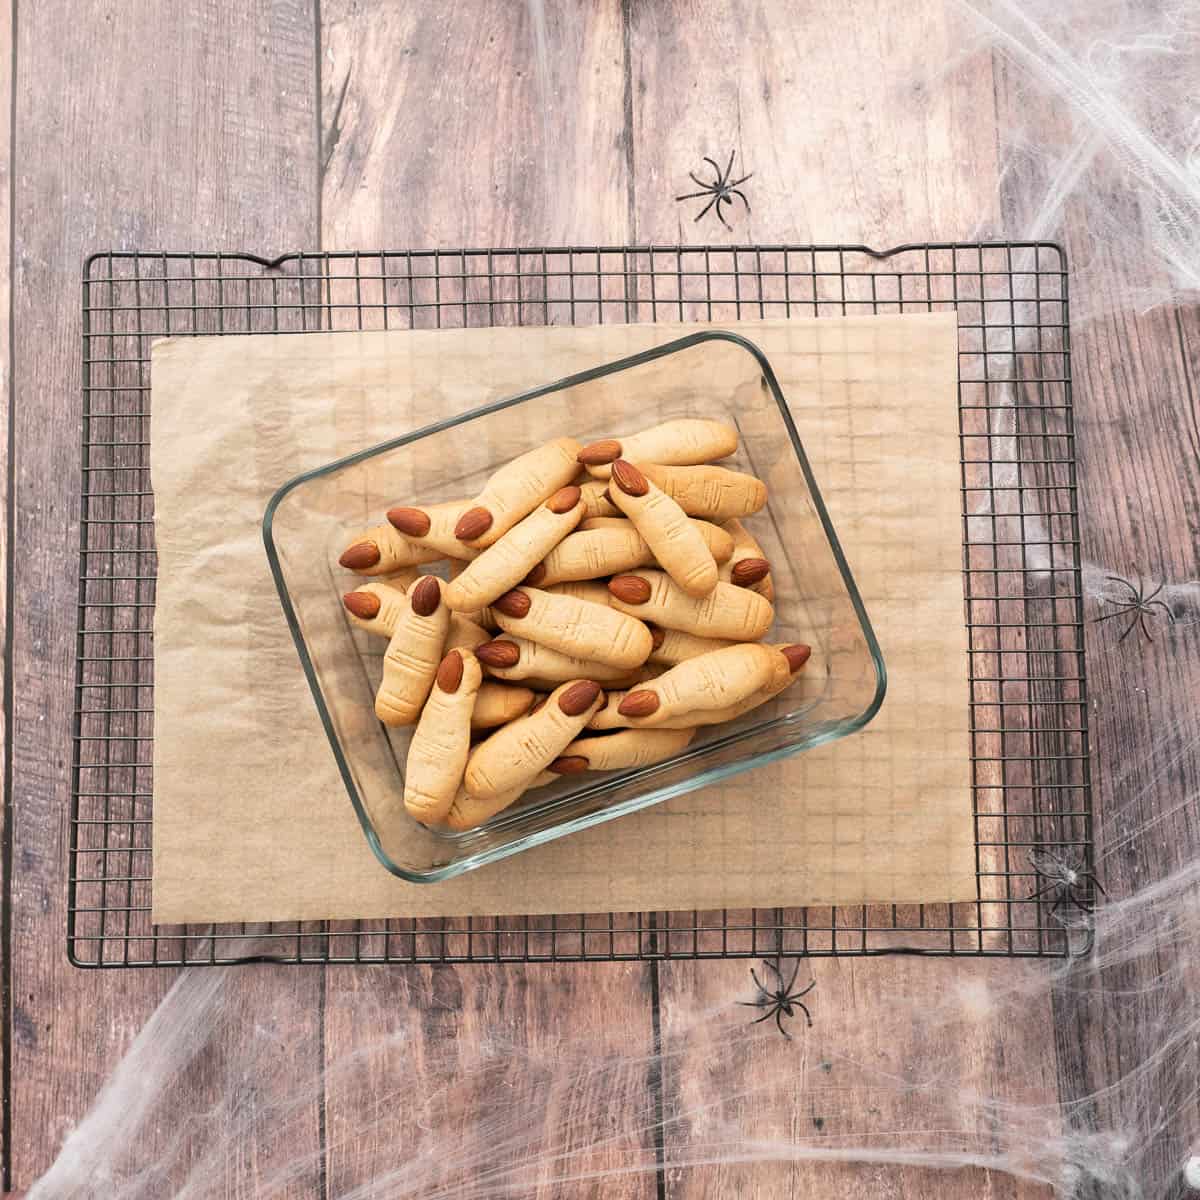 A glass storage conatiner filled with cookies in the shape of witch fingers.